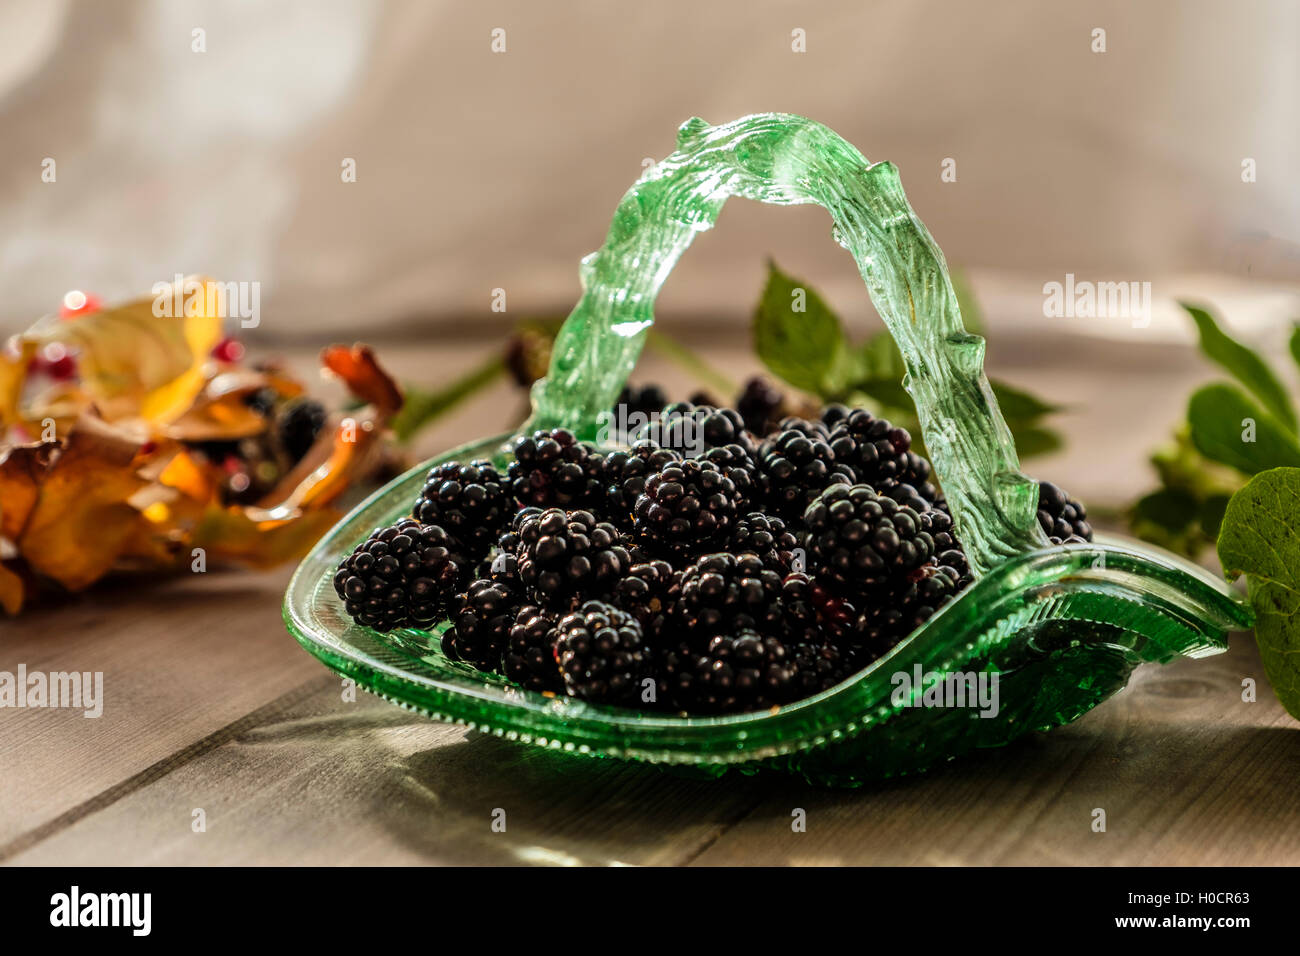 Vintage green glass basket full of blackberries with out of focus autumnal leaves on wooden table Stock Photo